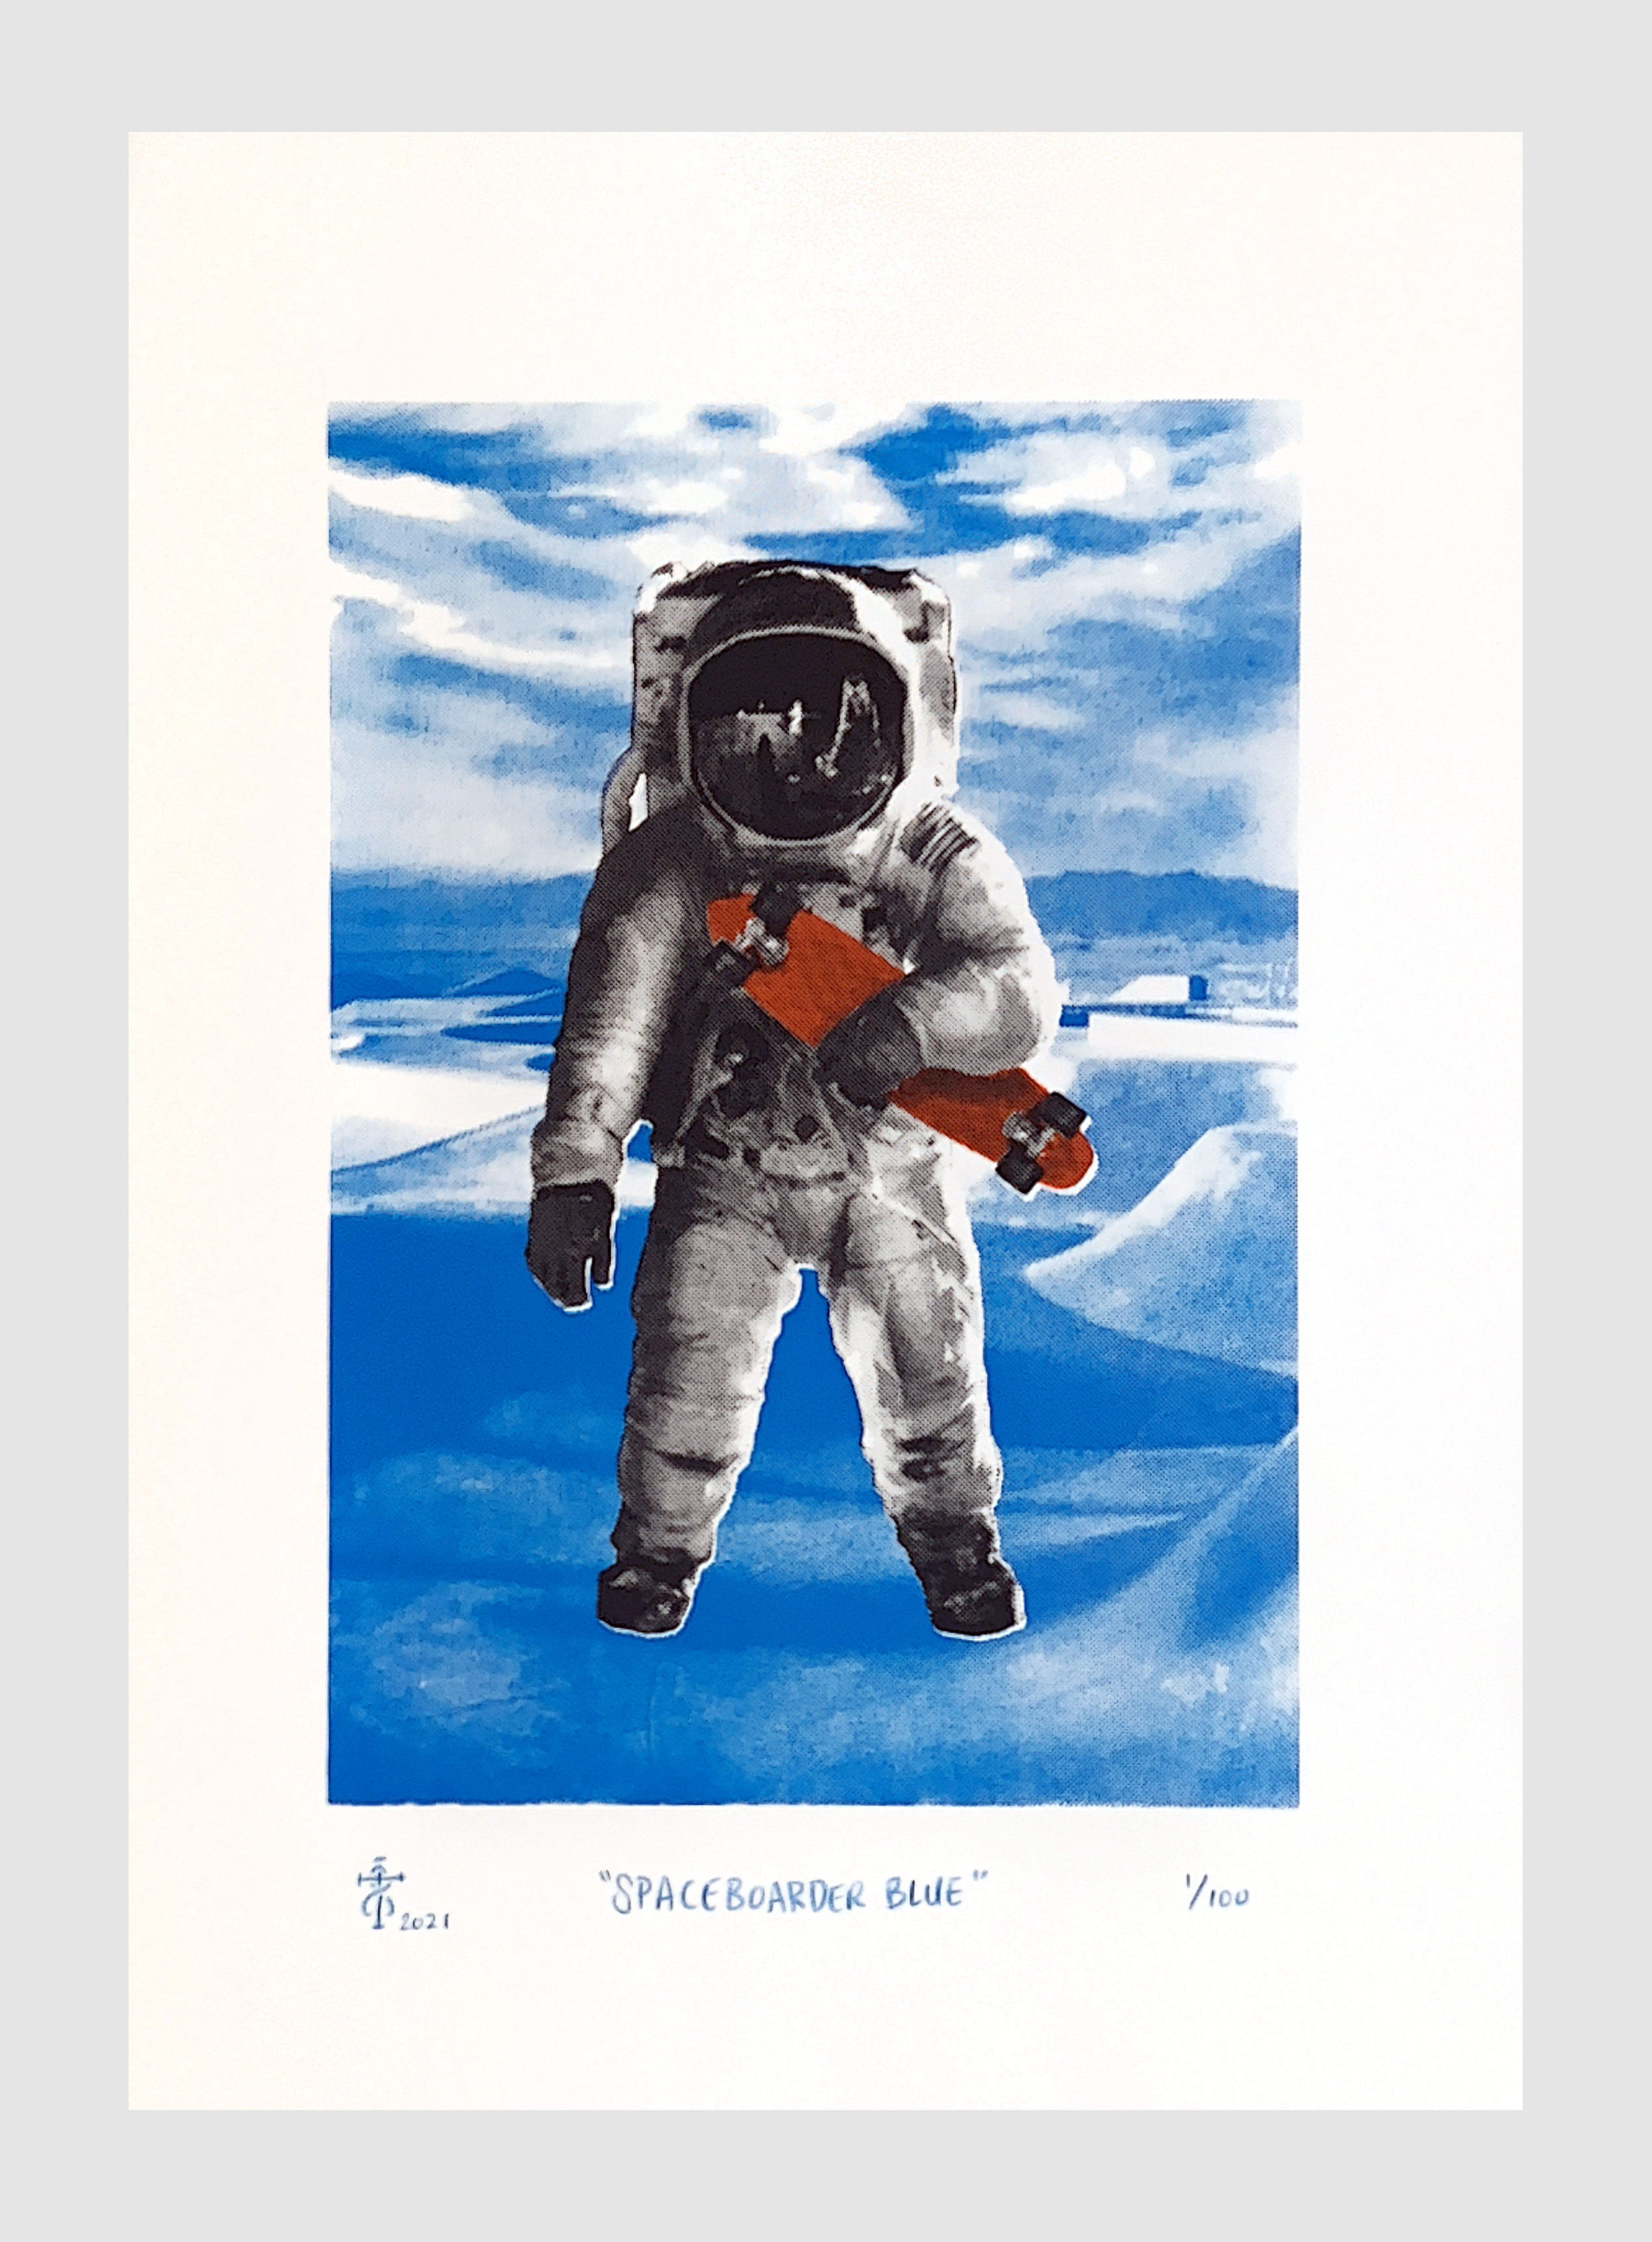   Spaceboarder (Blue), 2021   Silkscreen on rag paper, 14.5 x 10 in (image size), 21 x 15 in (paper size), edition of 100   PURCHASE  